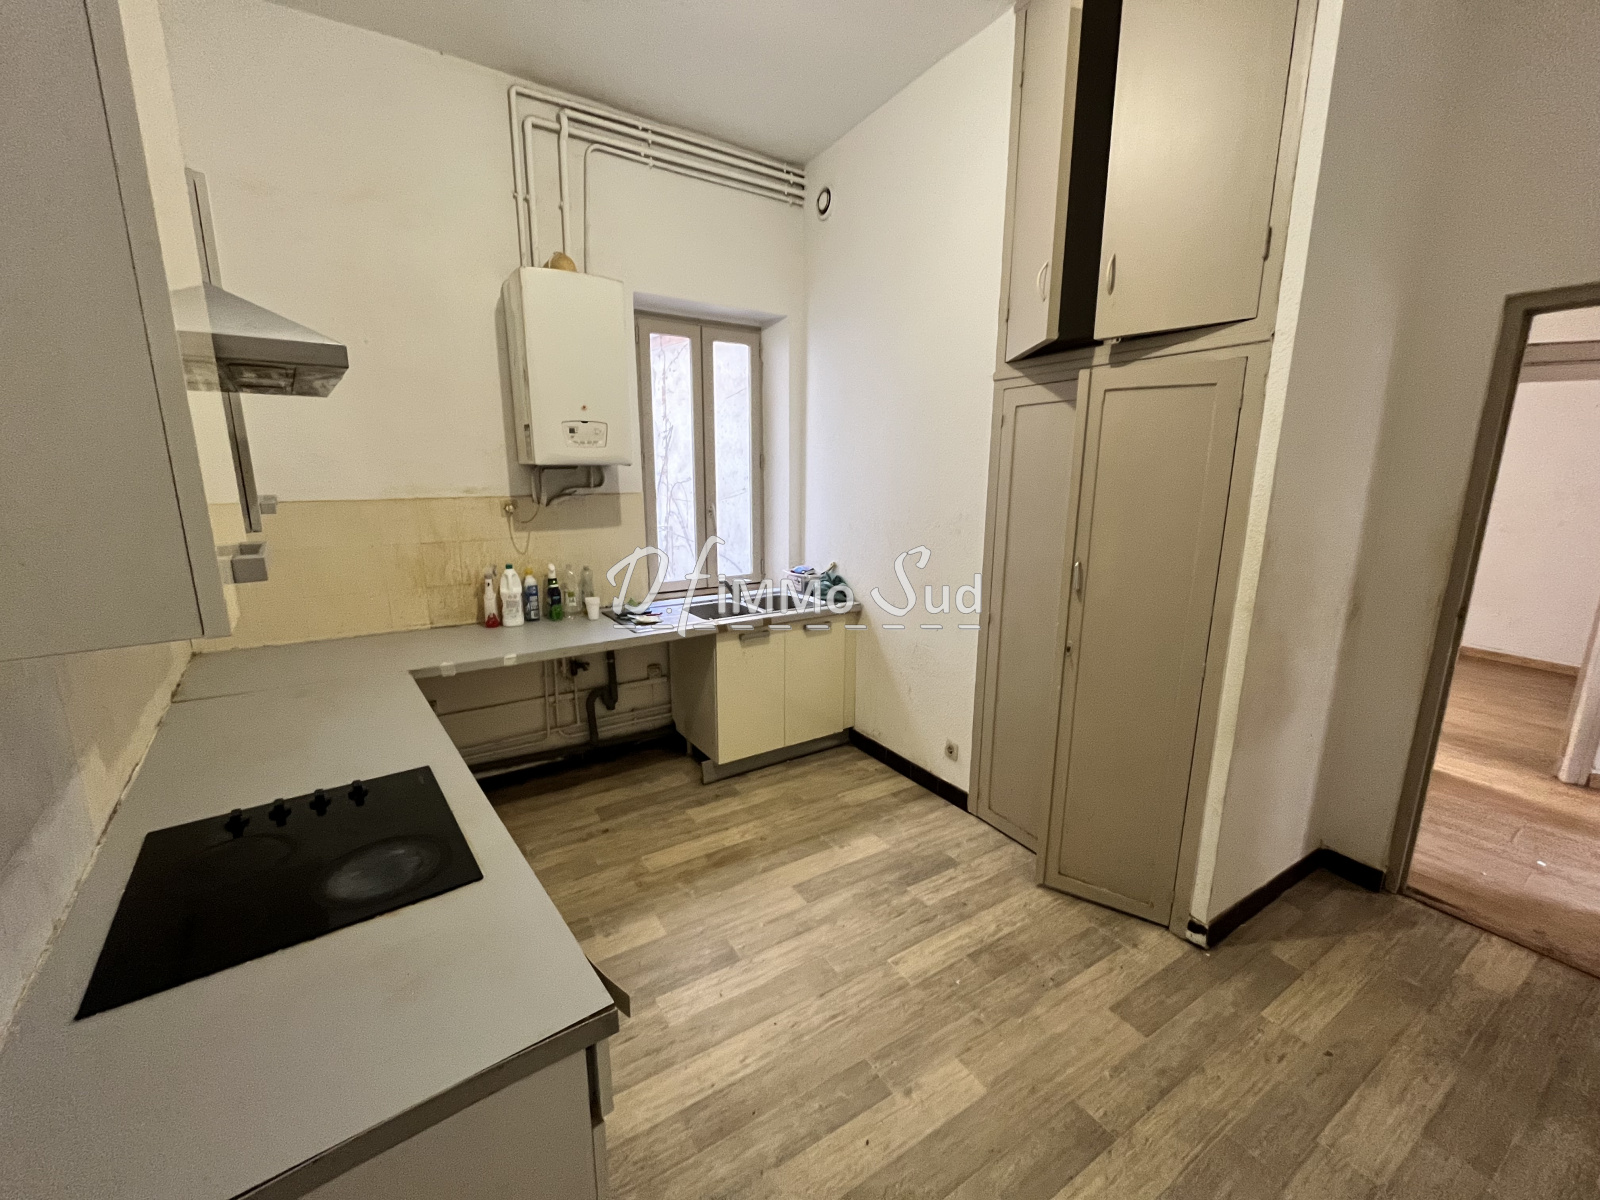 Image_, Appartement, Narbonne, ref :1447